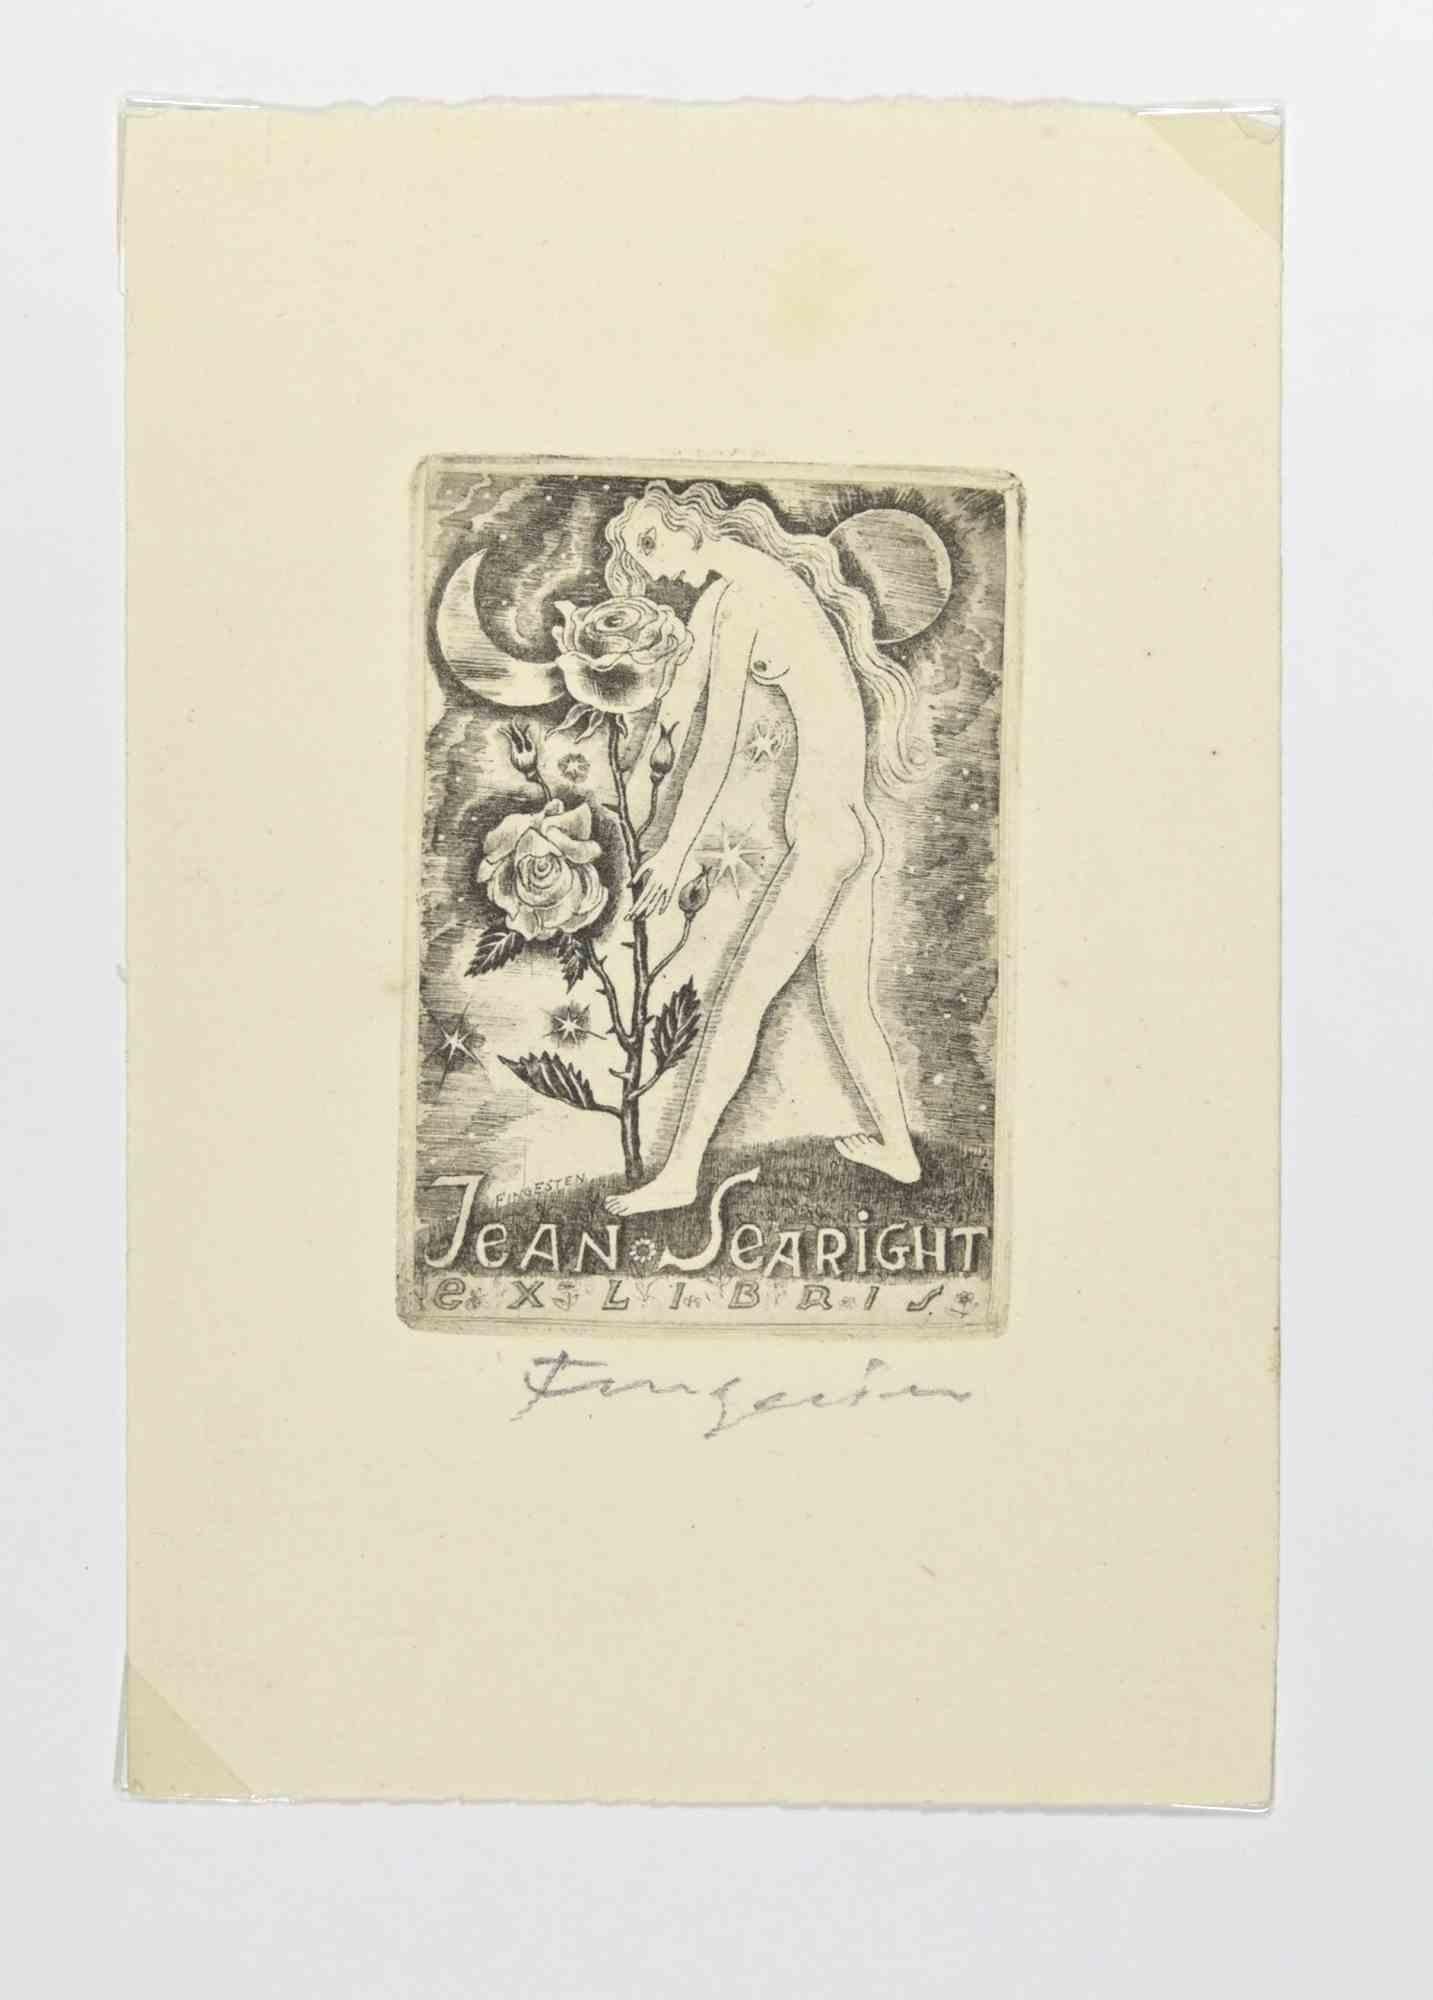 Ex Libris - Jean Searight is an Etching print created by  Michel Fingesten.

Hand Signed on the lower right margin.

The artwork is glued on cardboard.

Total dimensions: 23 x 16 cm.

Good conditions.

Michel Fingesten (1884 - 1943) was a Czech